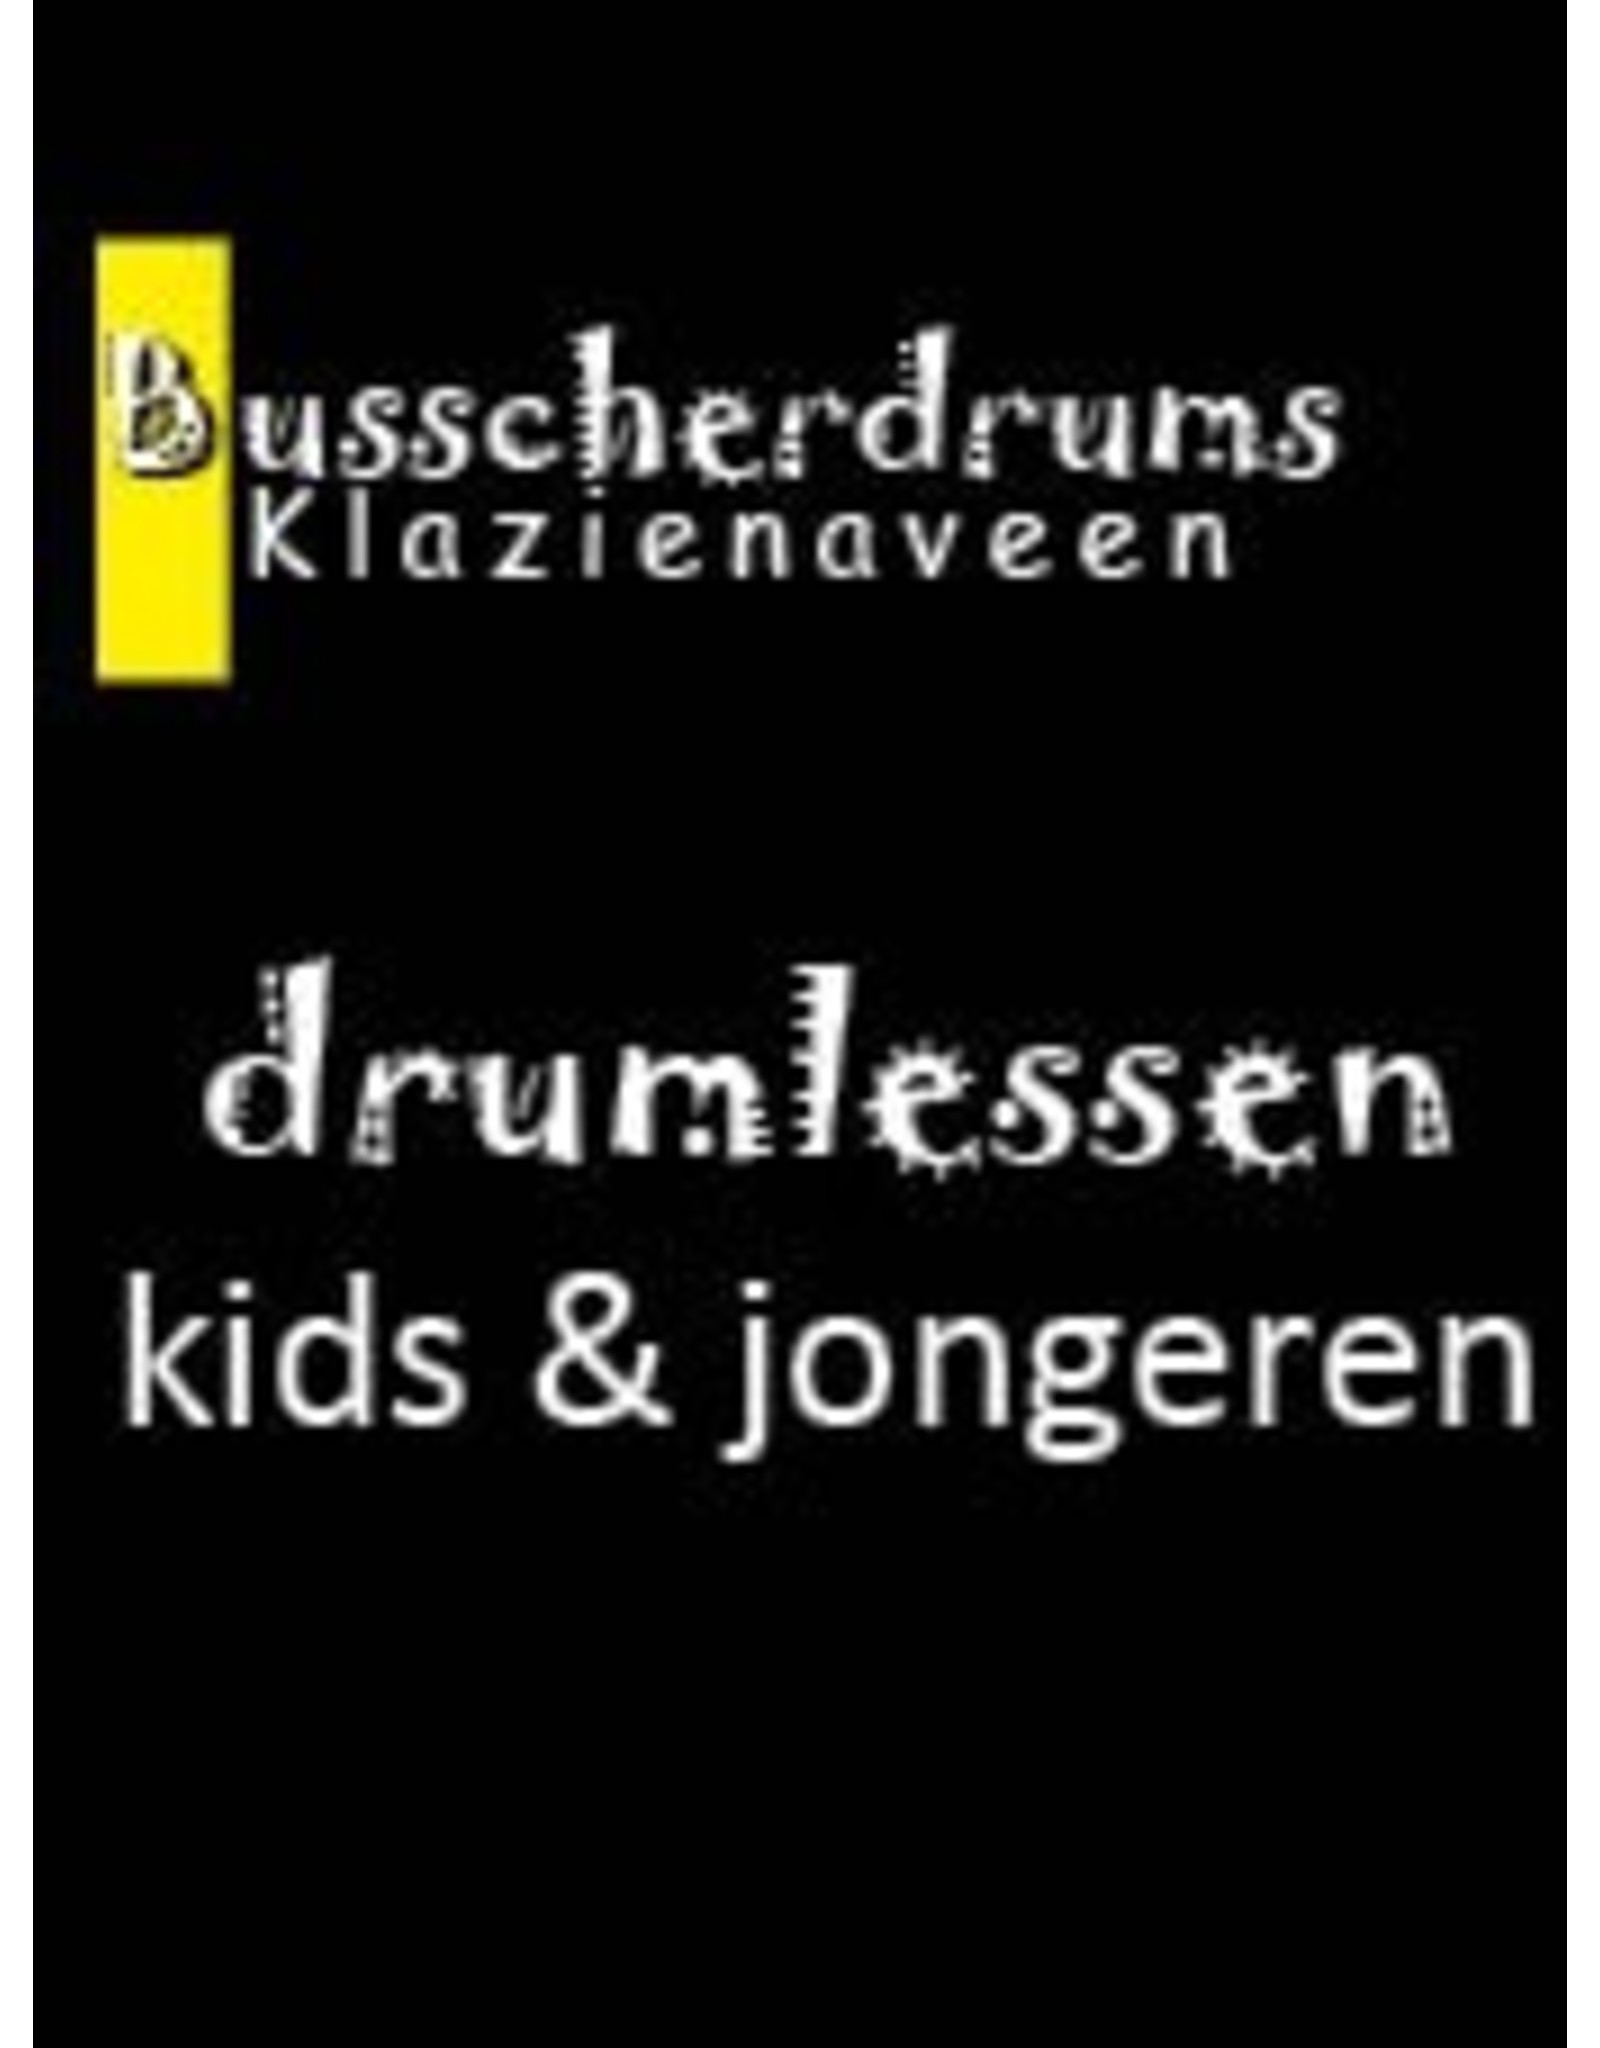 Busscherdrums Drum lessons FLEX-2 Lesson card 30 minutes individual drum lessons kids & youngsters 901-2